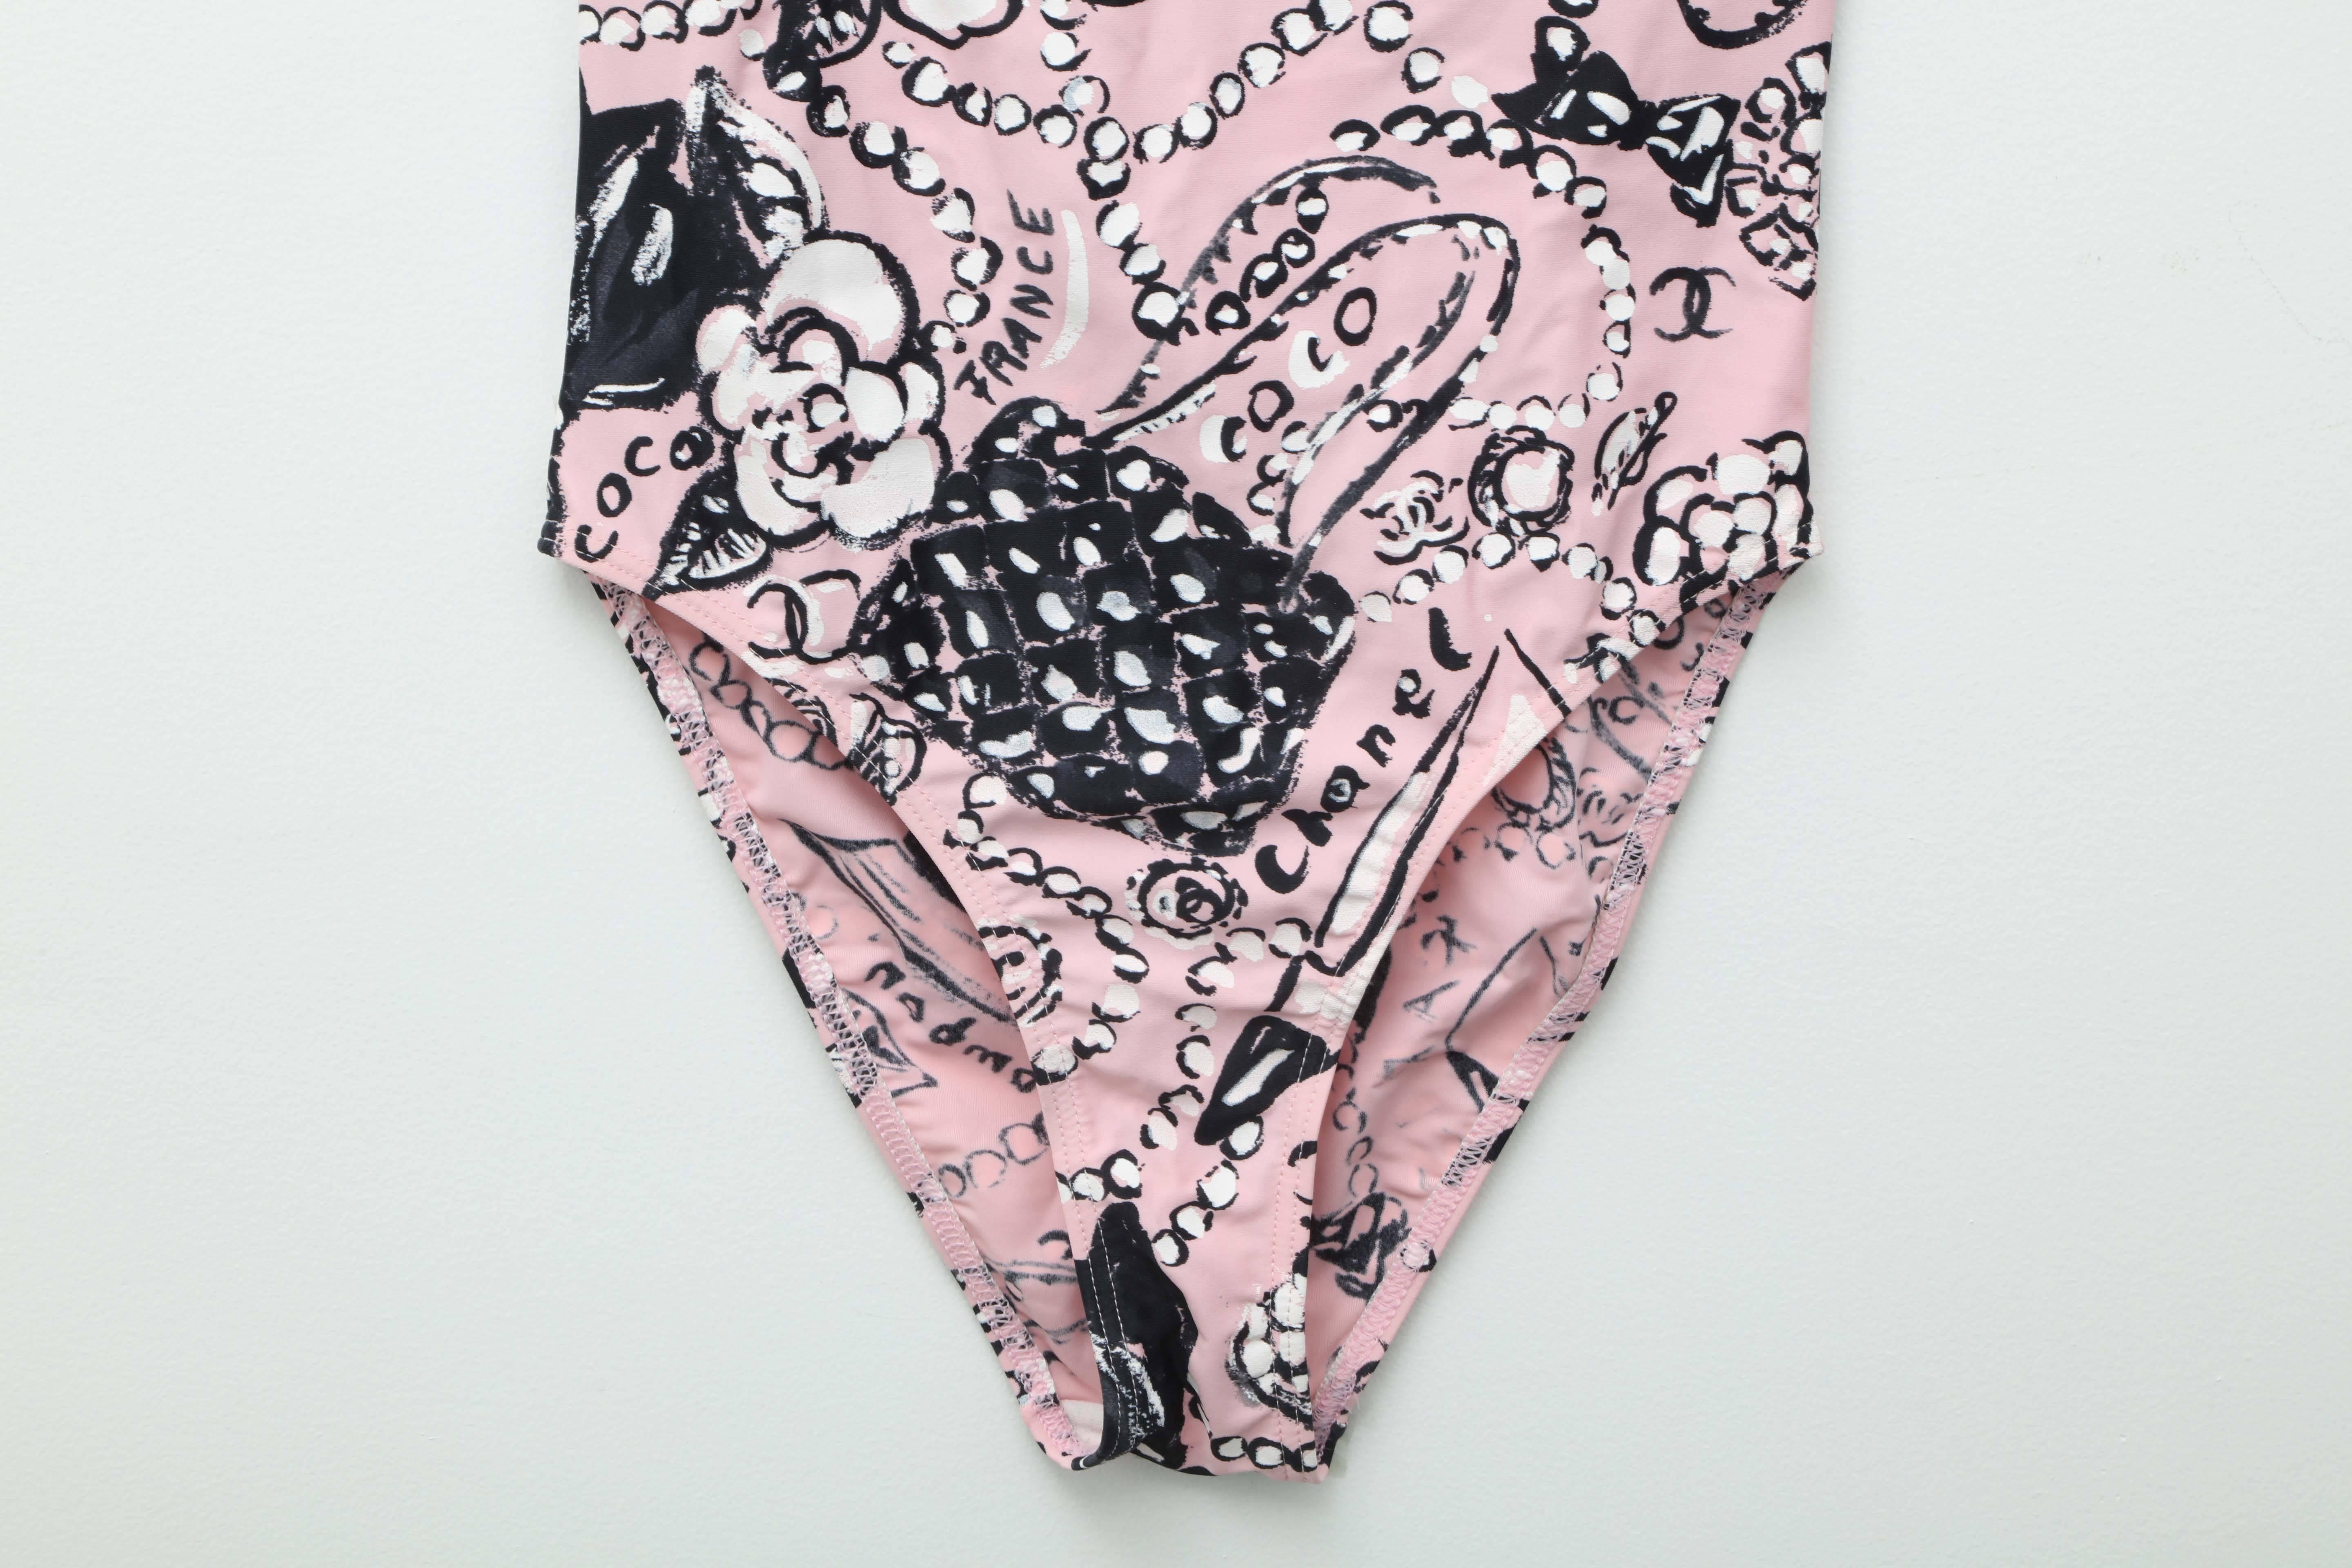 Gray Chanel Vintage Pink Iconic Print Swimsuit, 1993 